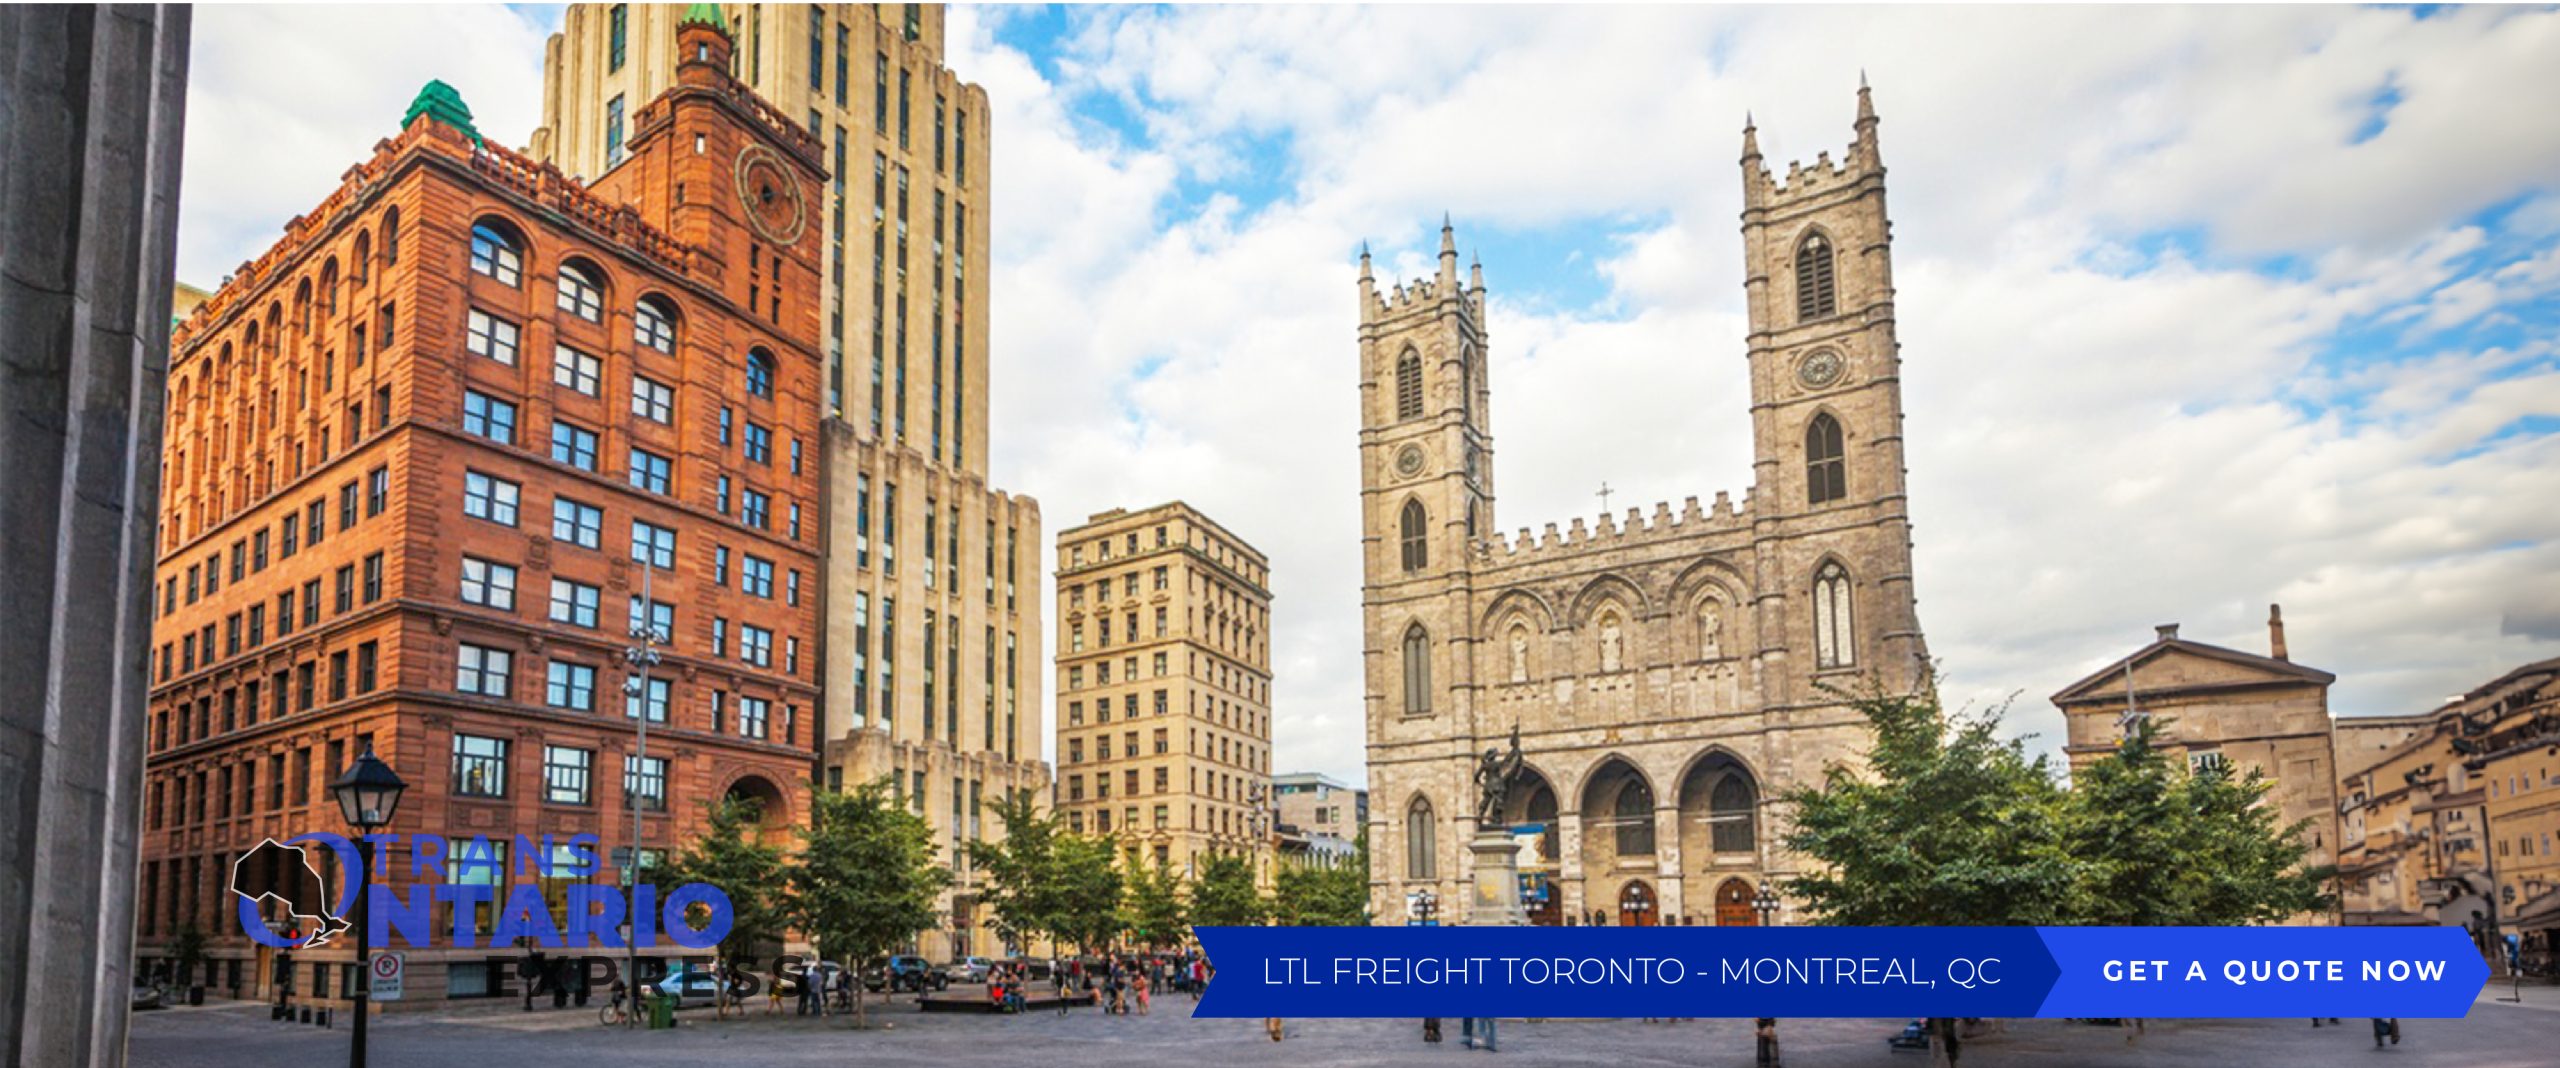 Toronto to Montreal LTL and FTL Freight Shipping